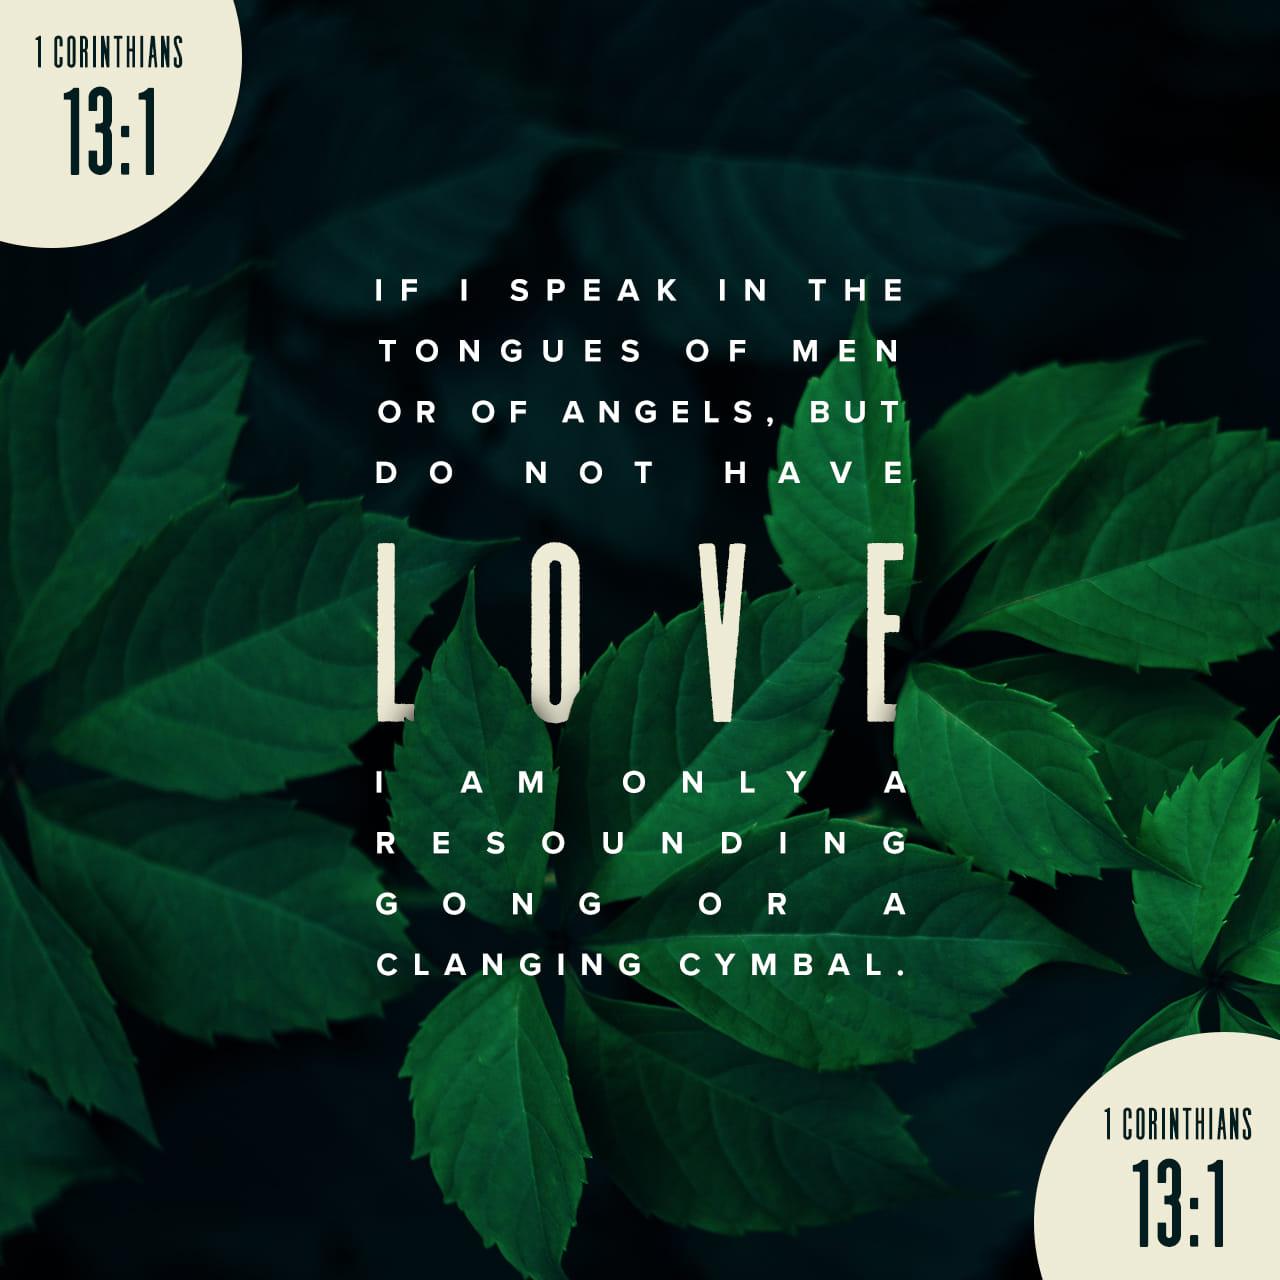 Bible Verse of the Day - day 89 - image 27094 (1 Corinthians 13:1-13)